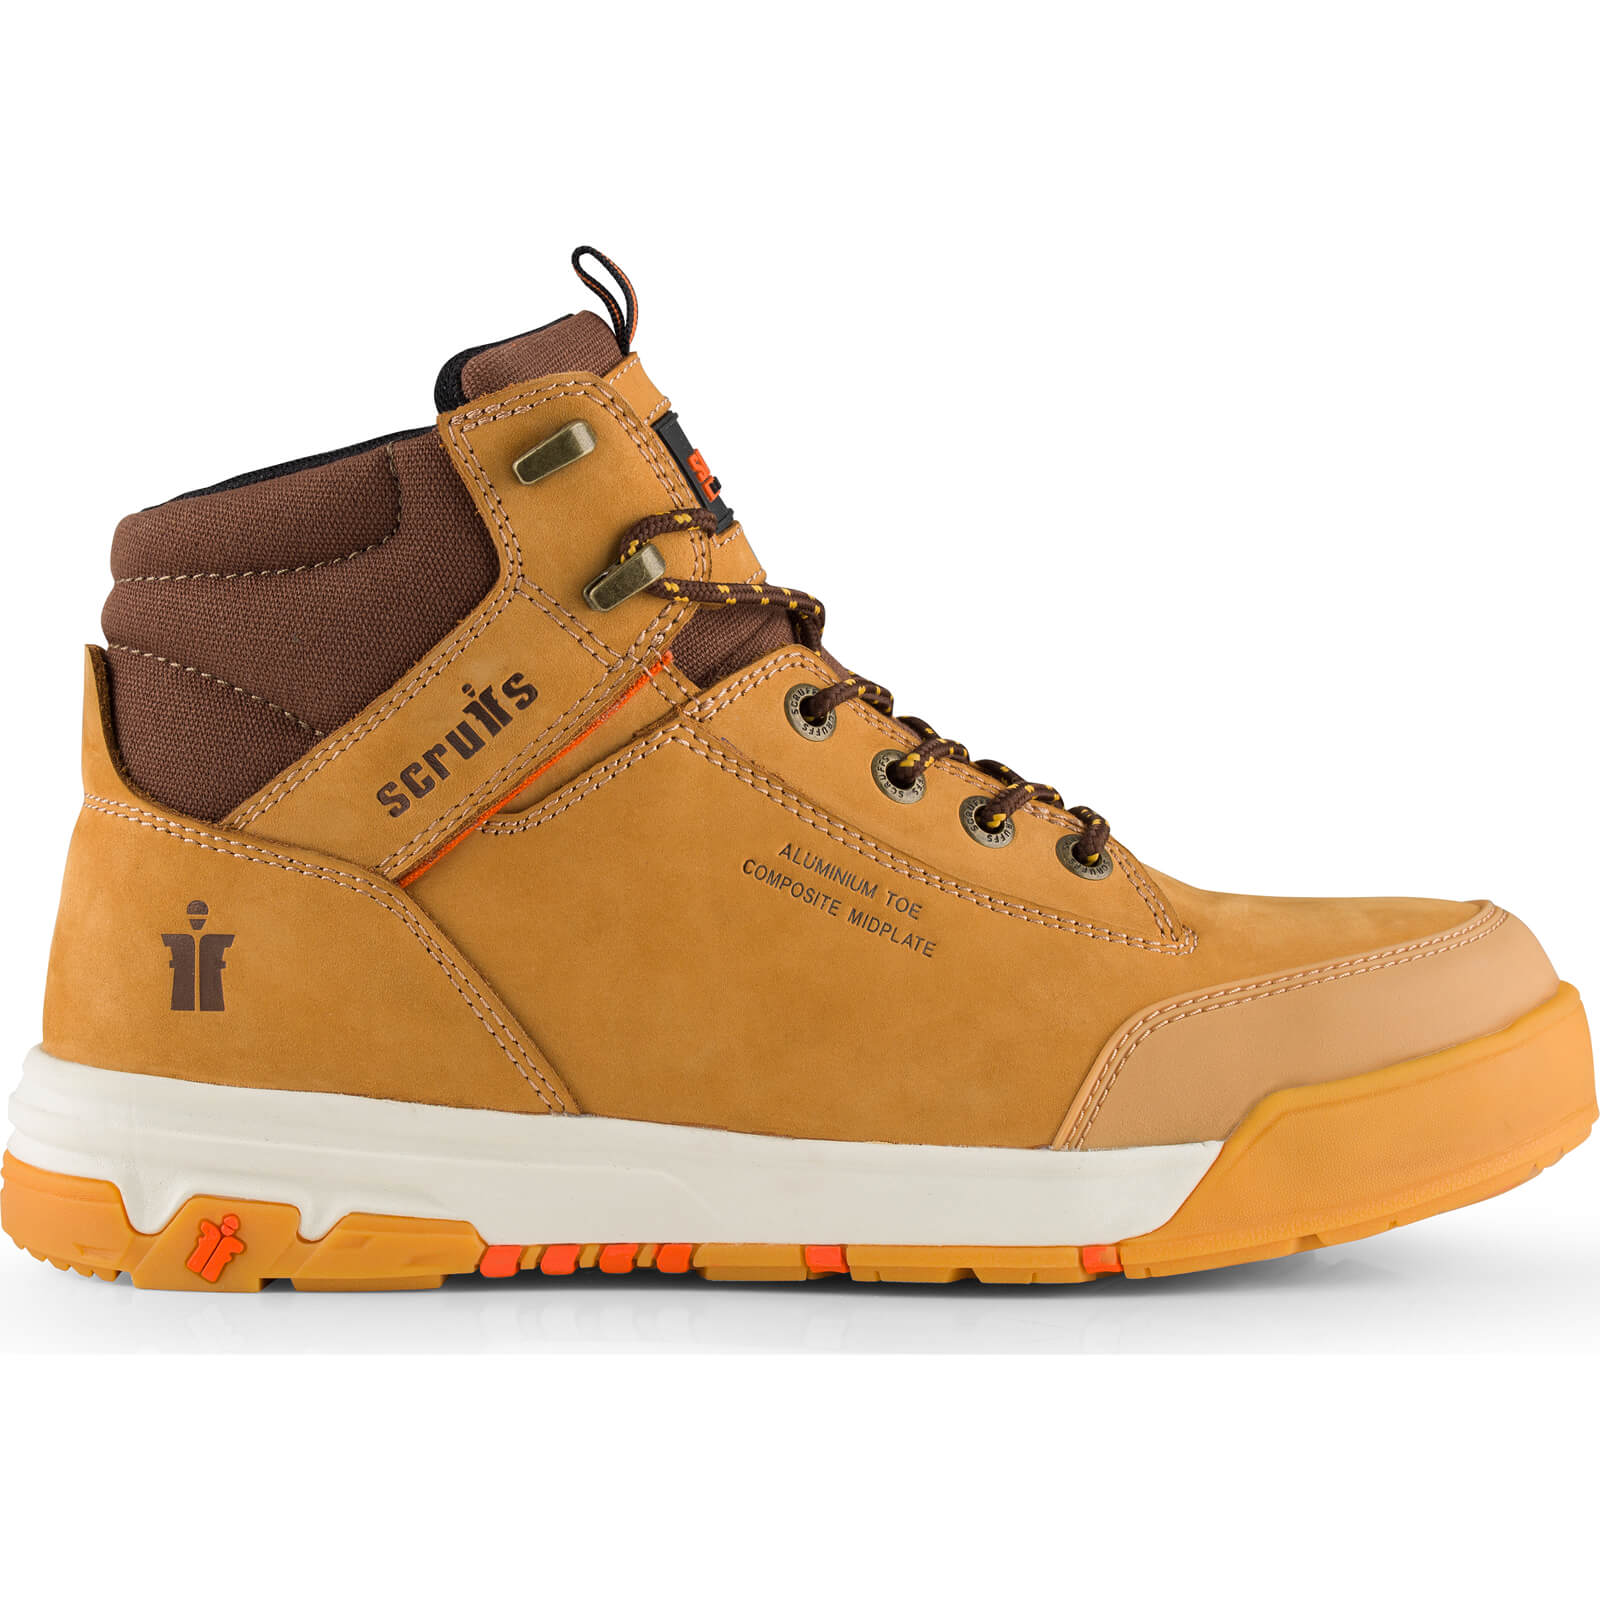 Image of Scruffs Switchback 3 Work Boot Tan Size 11